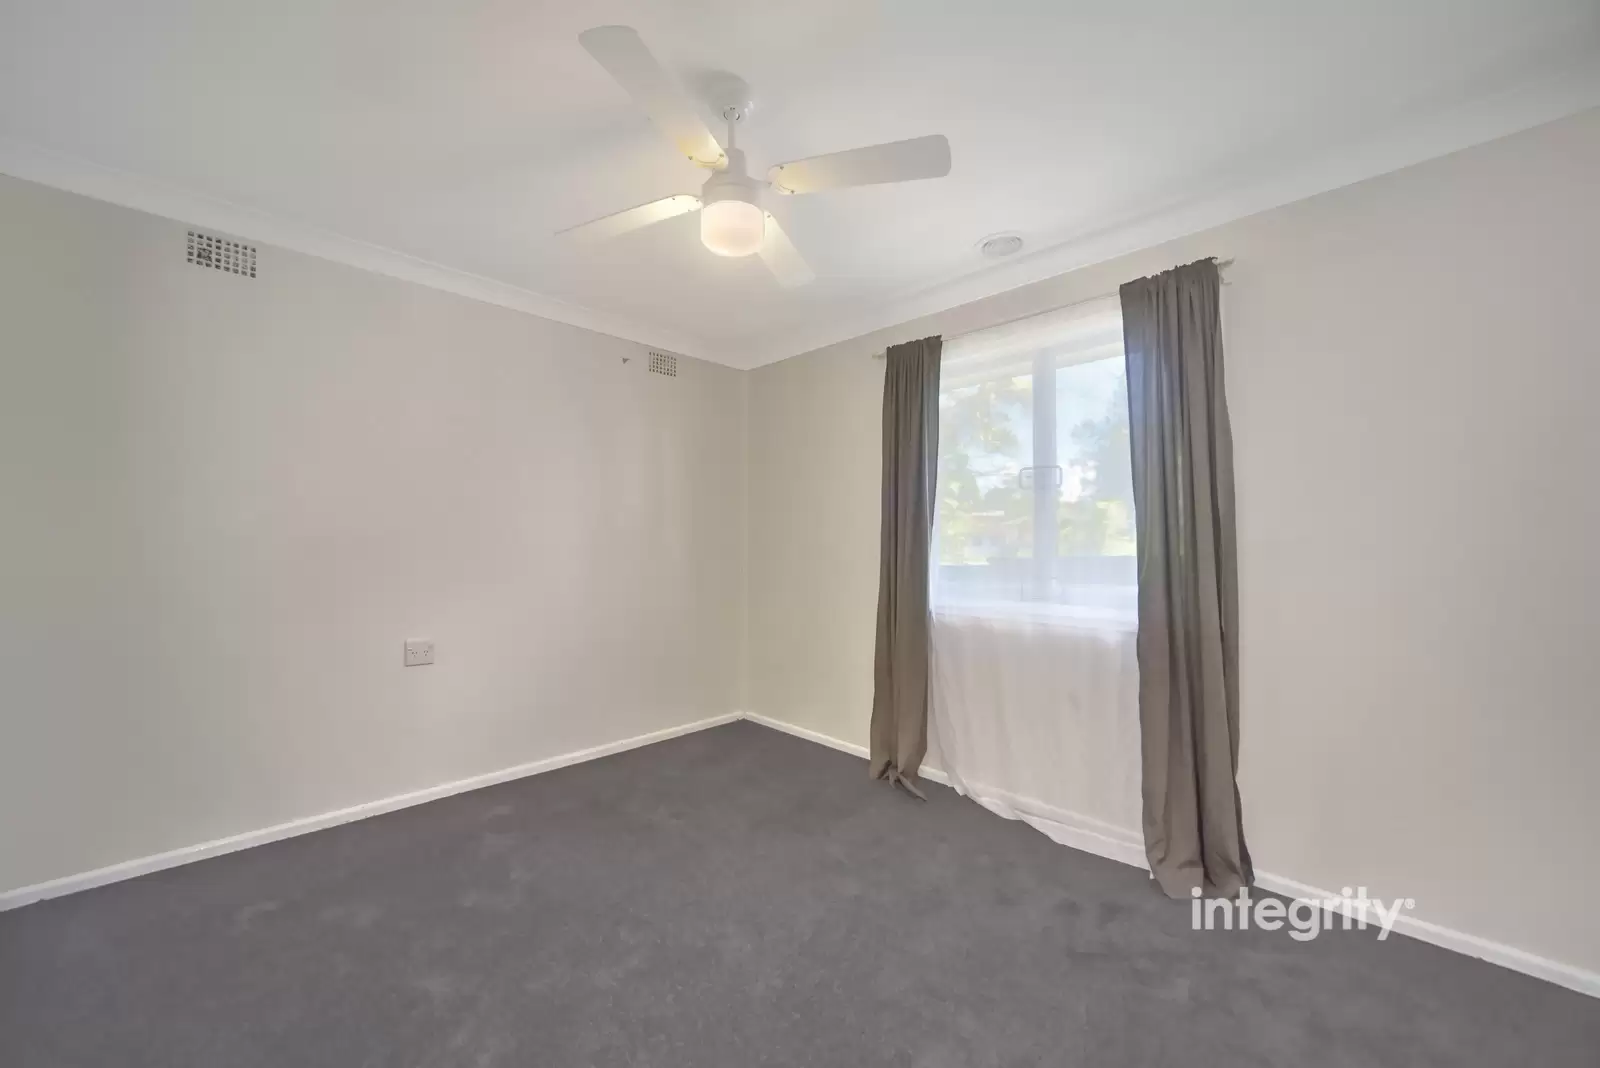 67 Journal Street, Nowra Sold by Integrity Real Estate - image 6